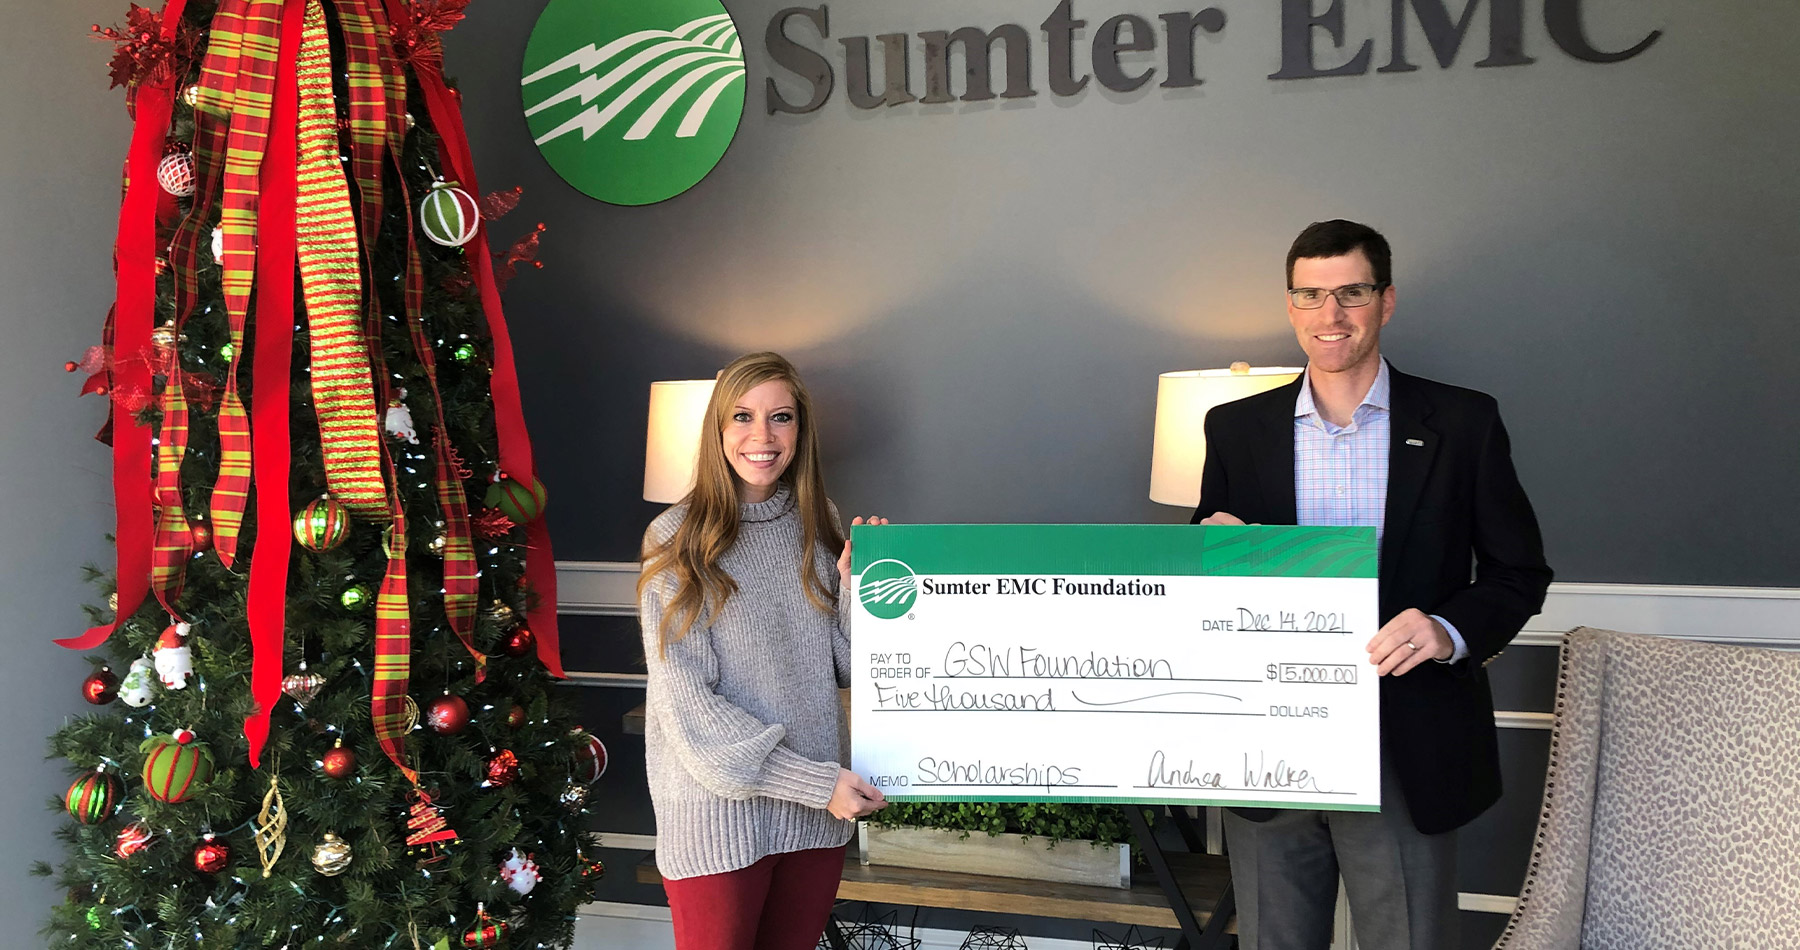 Andrea Walker, Sumter EMC Foundation Chairman, presents grant funds to Stephen Snyder, Executive Director of the GSW Foundation